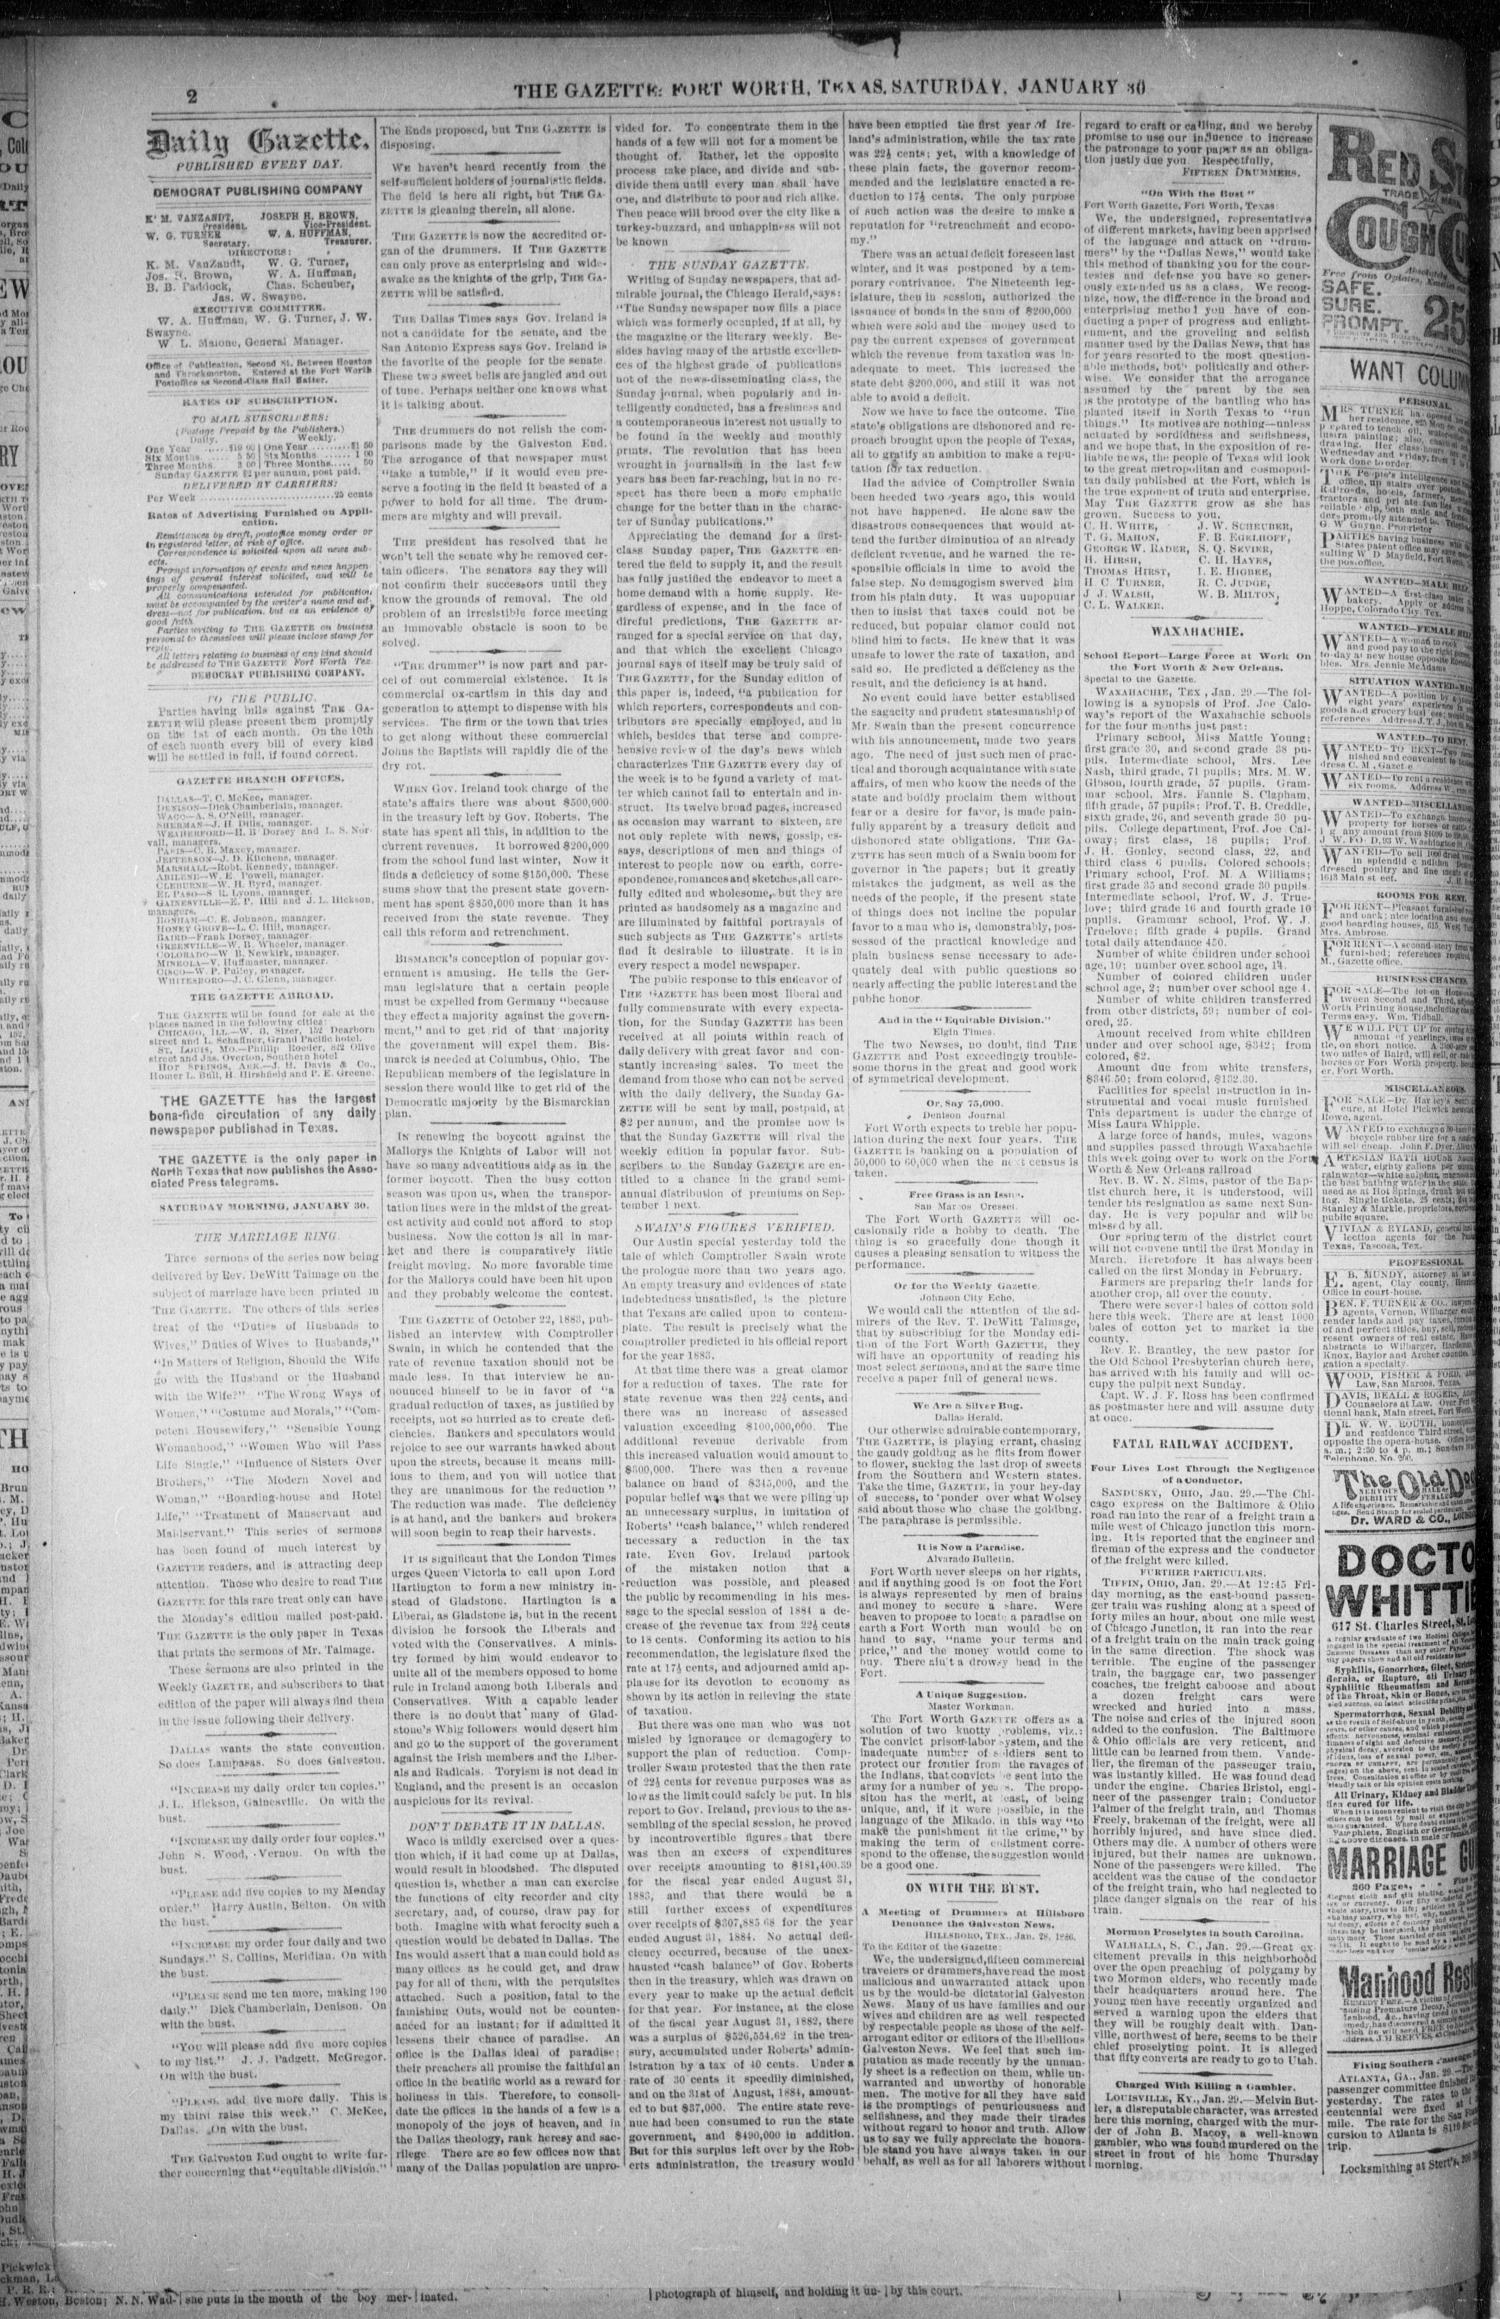 Fort Worth Daily Gazette. (Fort Worth, Tex.), Vol. 11, No. 185, Ed. 1, Saturday, January 30, 1886
                                                
                                                    [Sequence #]: 2 of 8
                                                